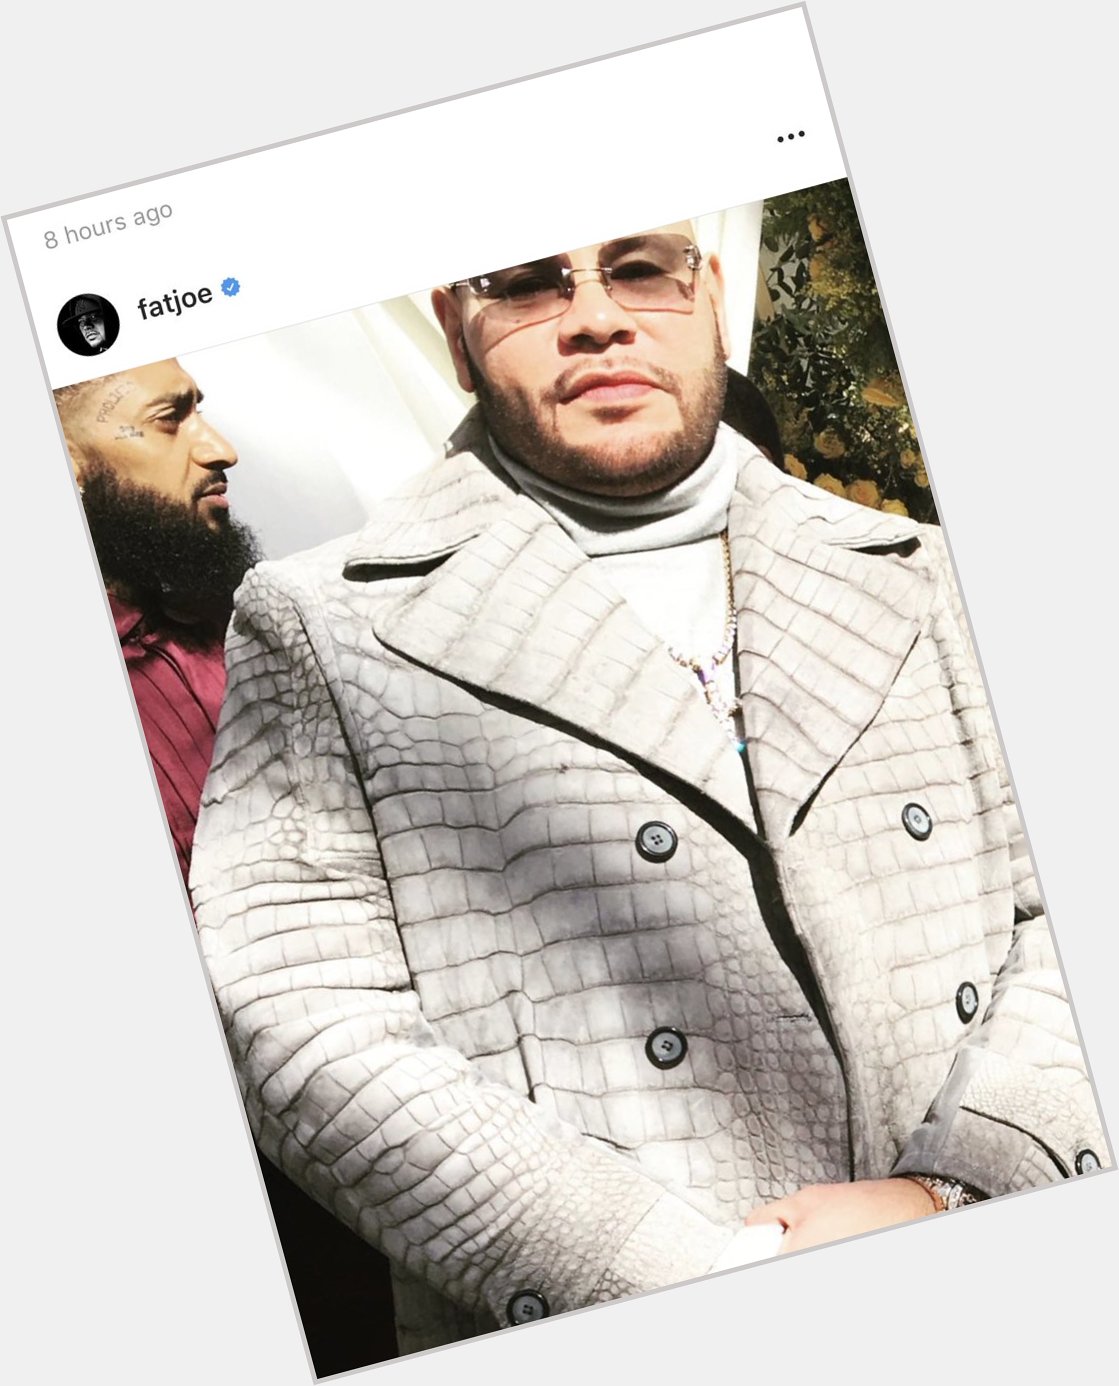 Saw this on the instagram.. Fat Joe wishing Nip a happy birthday and I was confused. 